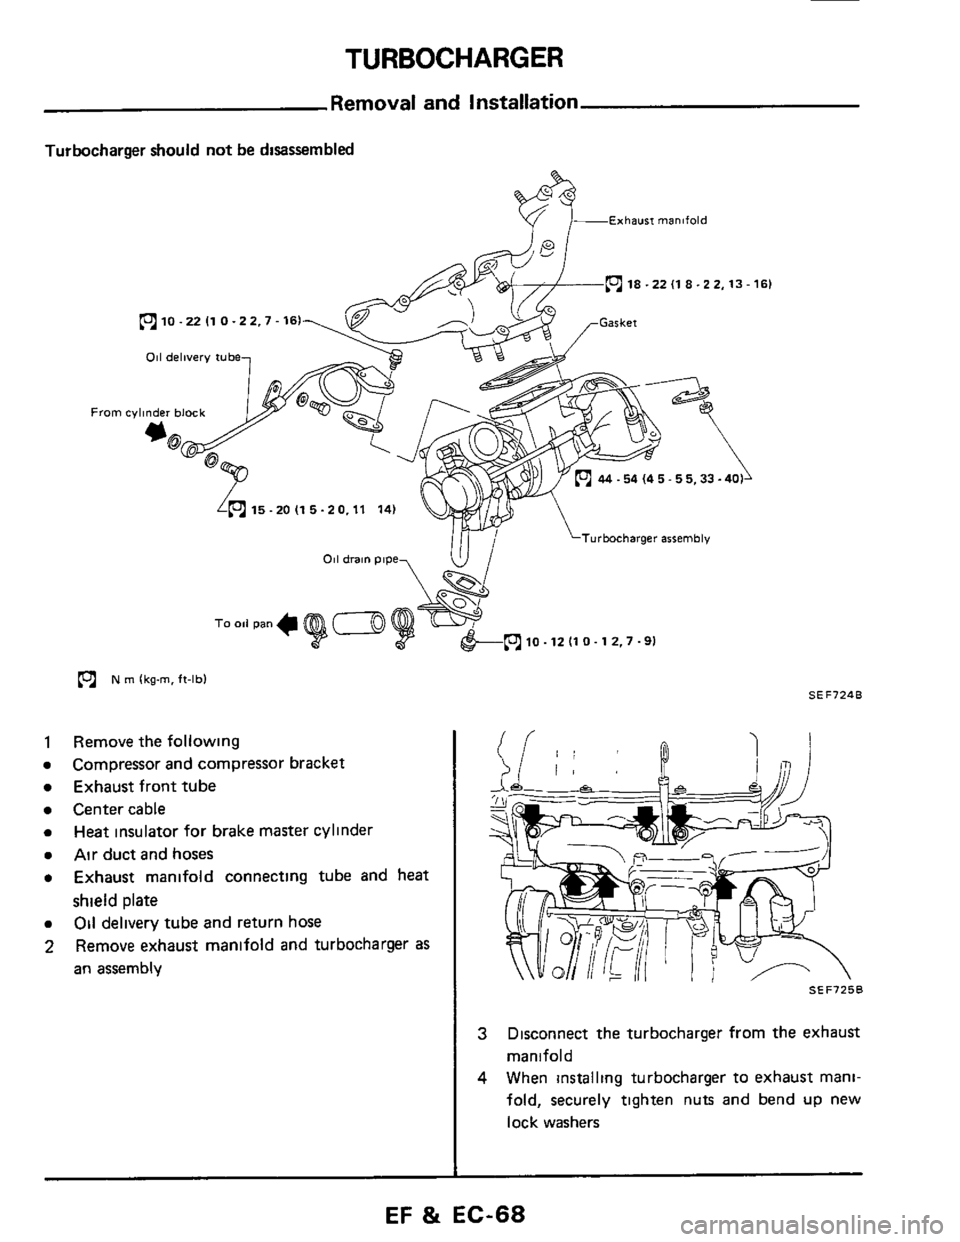 NISSAN 300ZX 1984 Z31 Engine Fuel And Emission Control System Repair Manual TURBOCHARGER 
Removal and Installation 
Turbocharger  should not be disassembled 
&- Exhaw manifold 
(c1 18 -22 (1 8-22.13-161 
10 -22 I1 0 -22.7.161 
011 delivery tube 
From cylinder block 
*@ 
15-2O